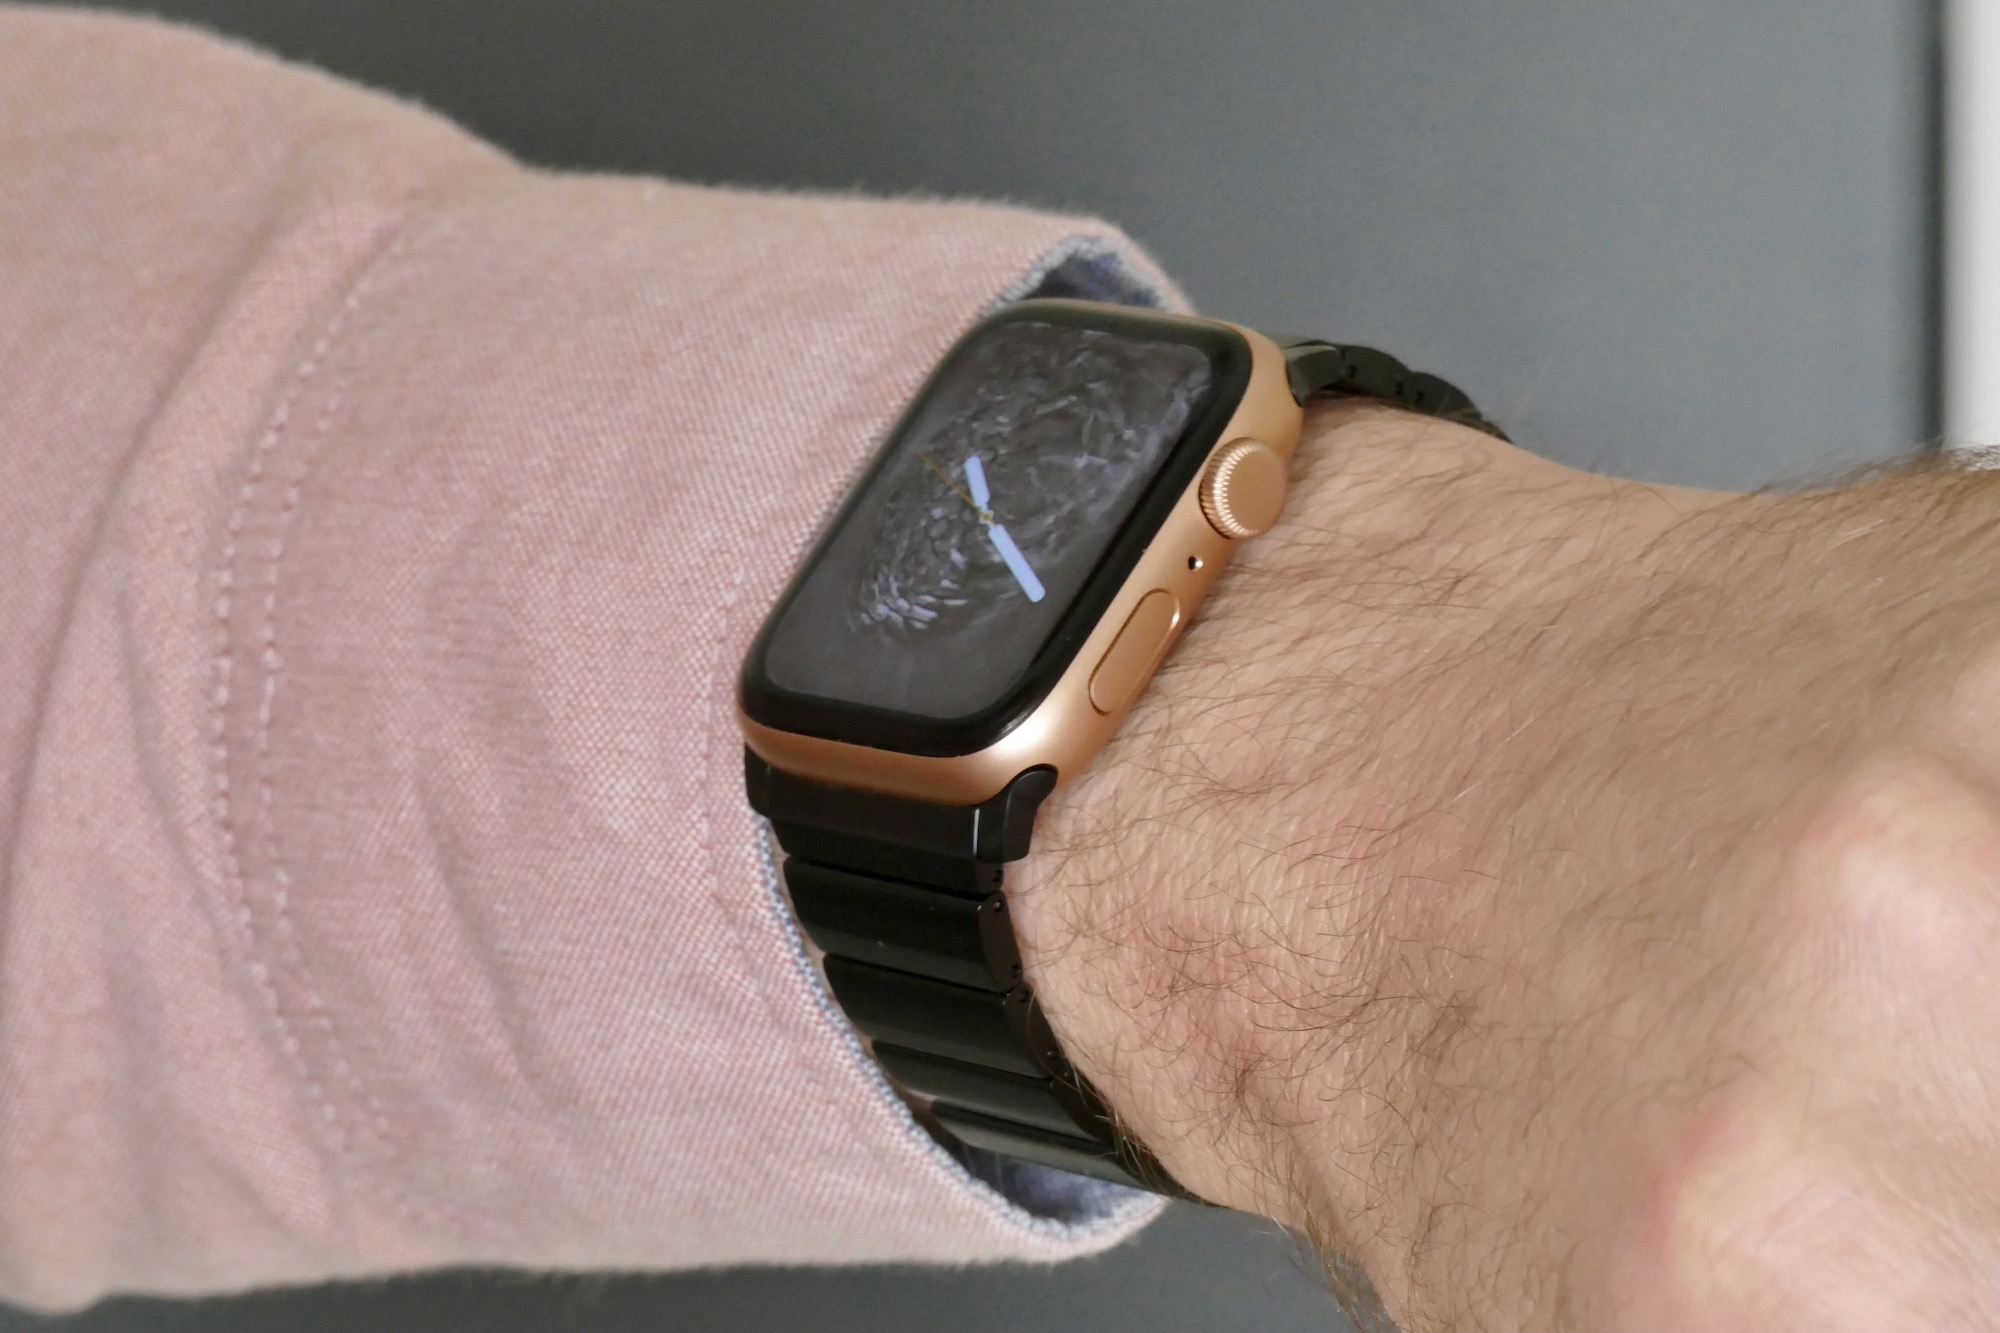 nomad titanium steel band apple watch hands on photos price release date se gold wrist